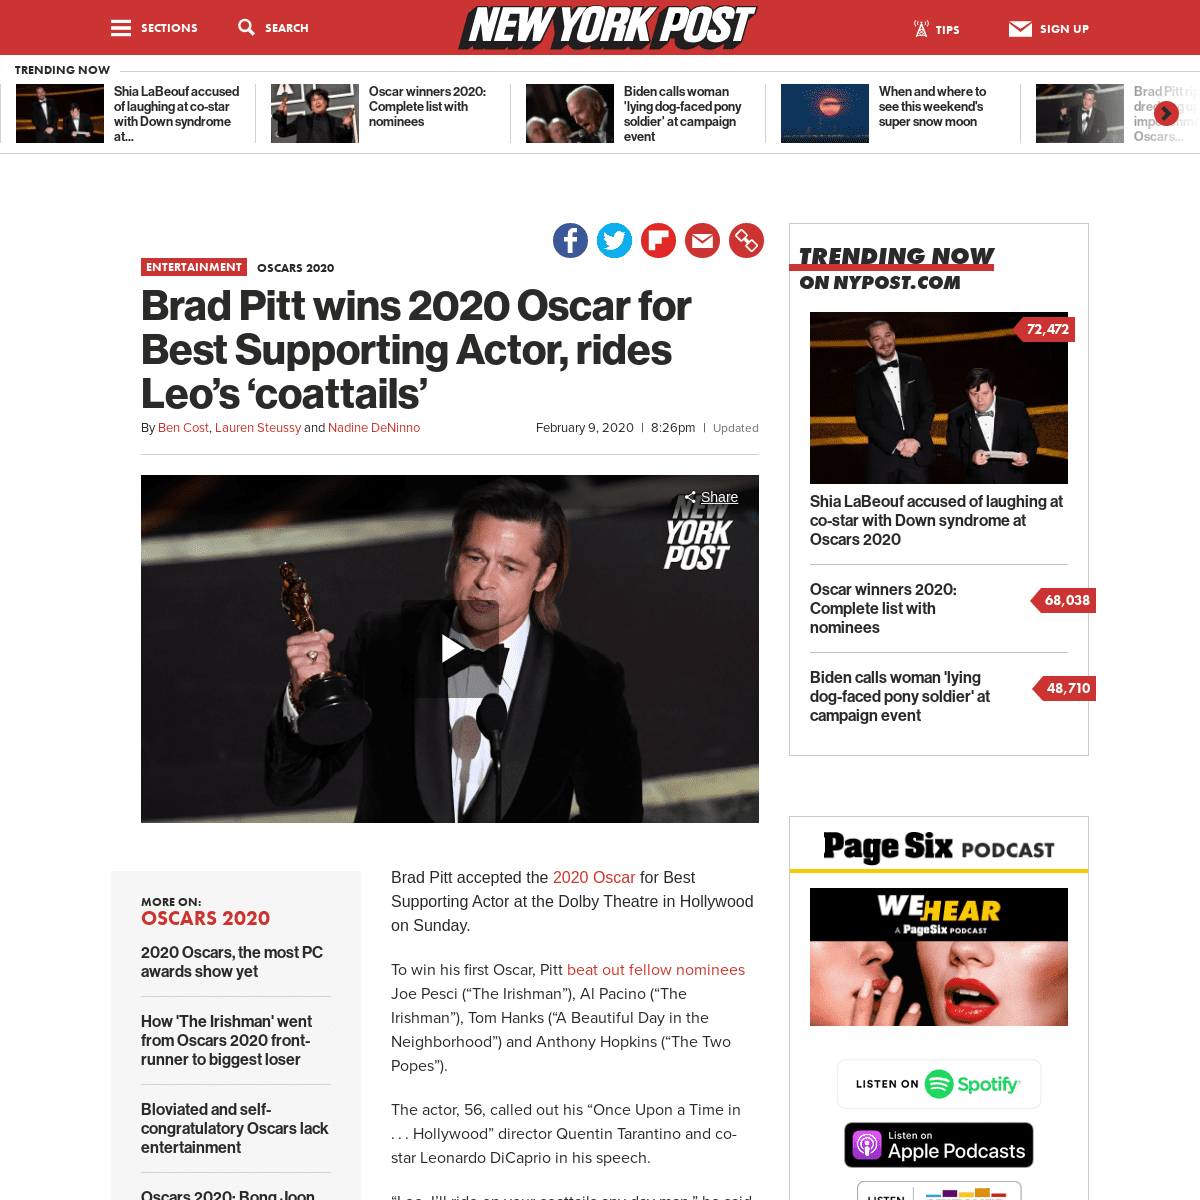 A complete backup of nypost.com/2020/02/09/brad-pitt-wins-2020-oscar-for-best-supporting-actor/